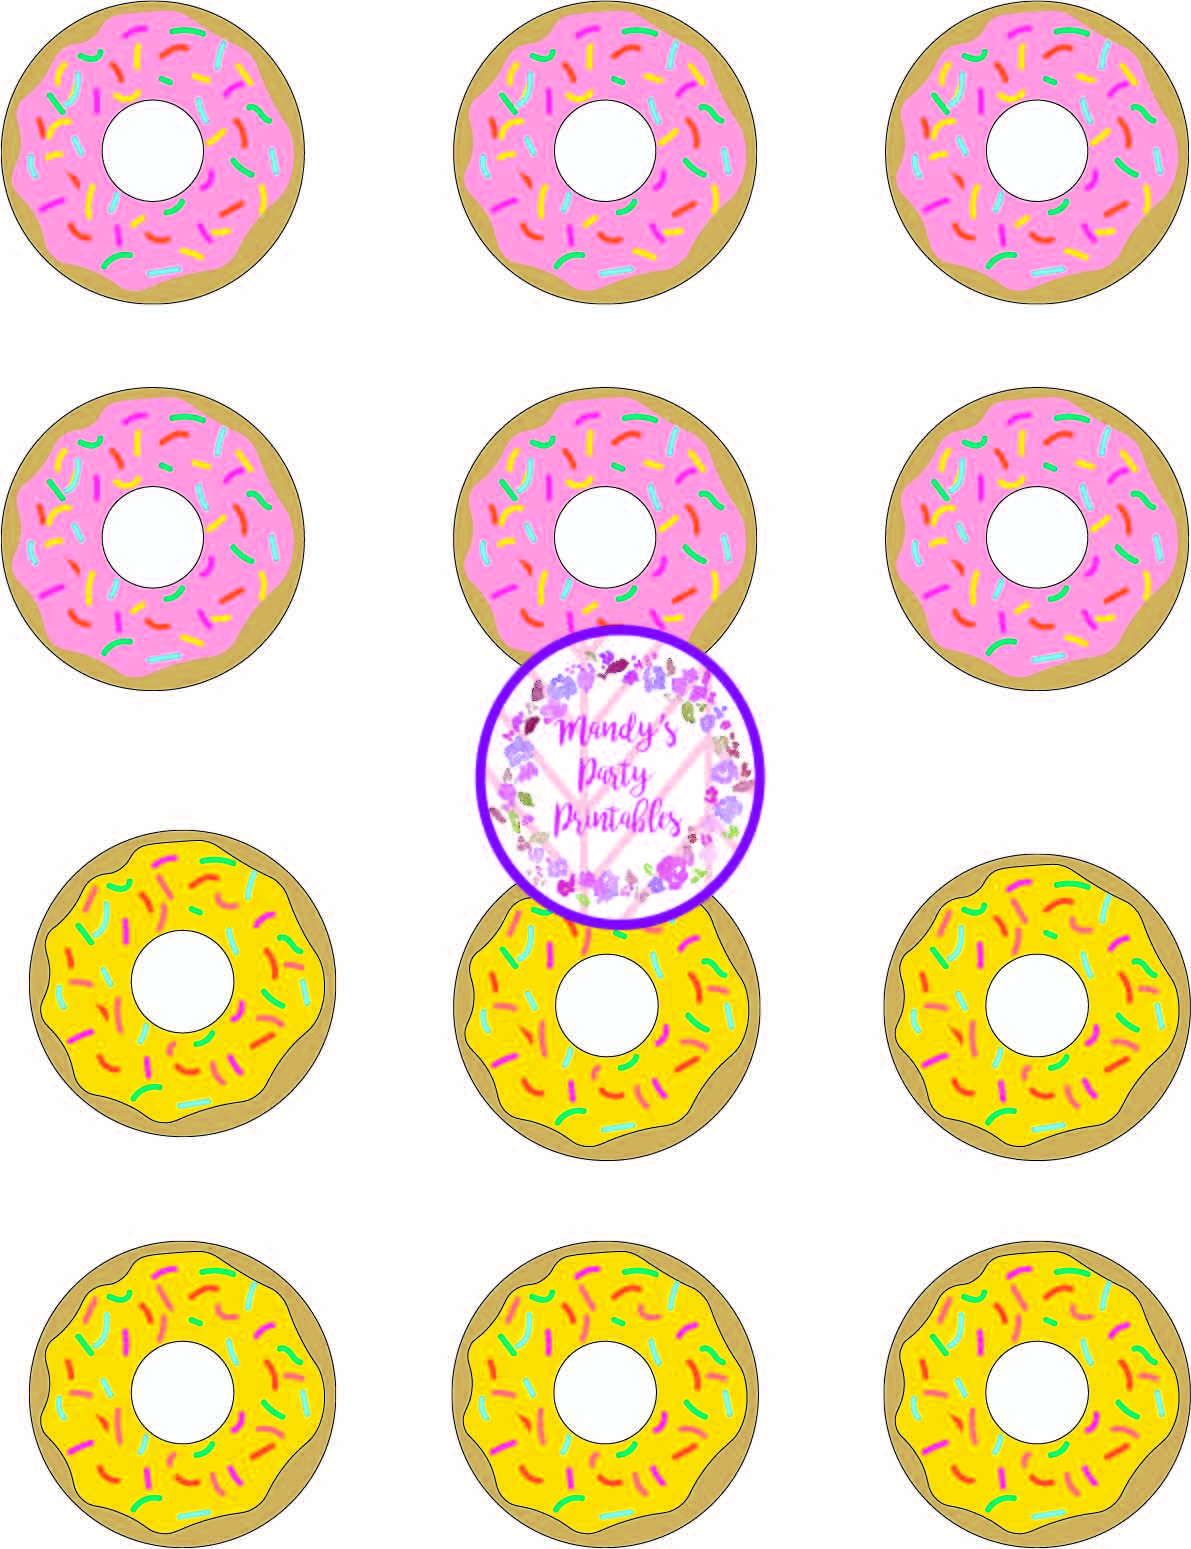 donut-party-game-tic-tac-toe-mandy-s-party-printables